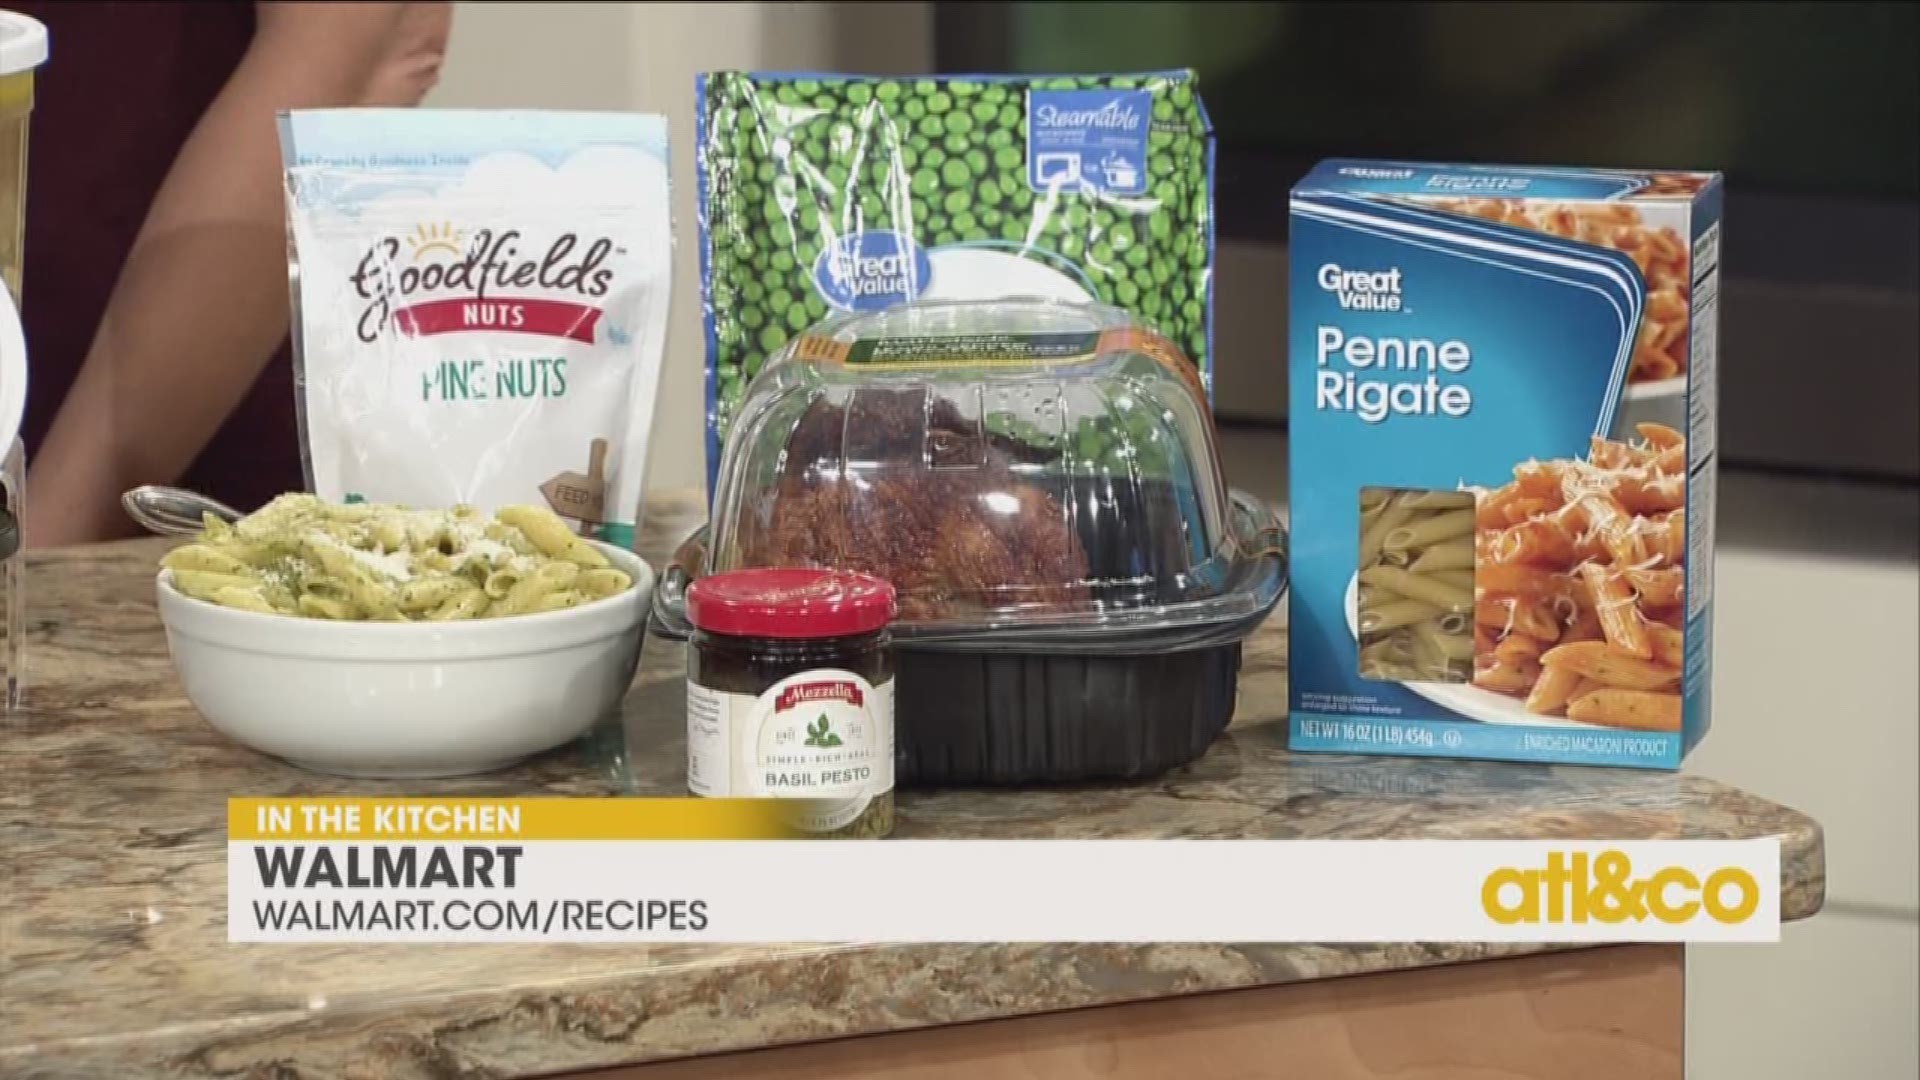 Check out walmart.com/recipes for easy and yummy holiday solutions!